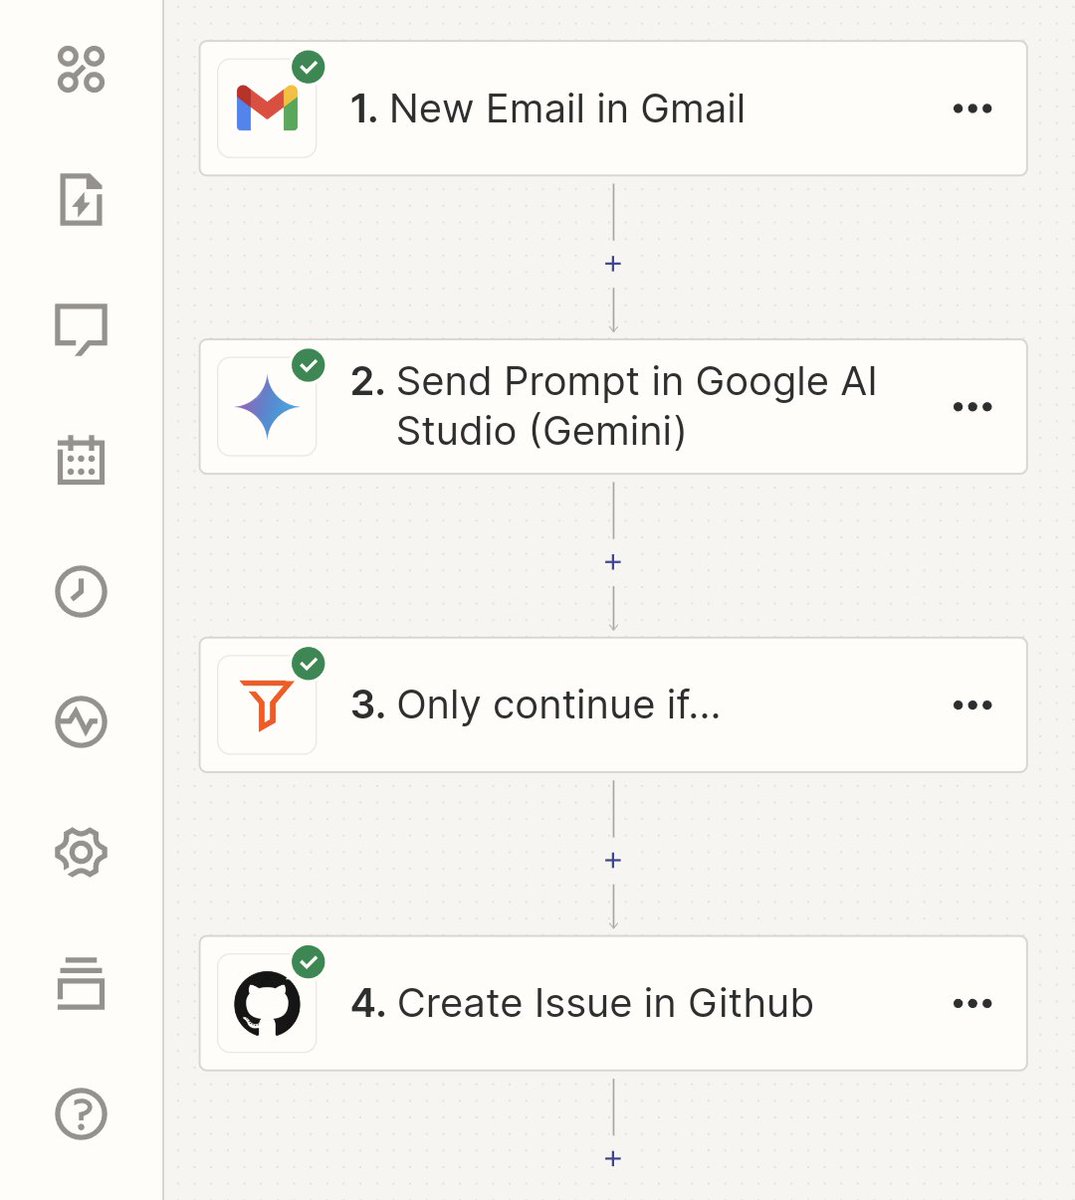 Obsessed with how quick and easy it is to create multi-step automations using the Gemini APIs + Workspace. ❤️ Ex: for each new email, if that email contains constructive feedback or a bug report for one of my OSS projects, file it as an issue on that repo and tag it as 'bug'.